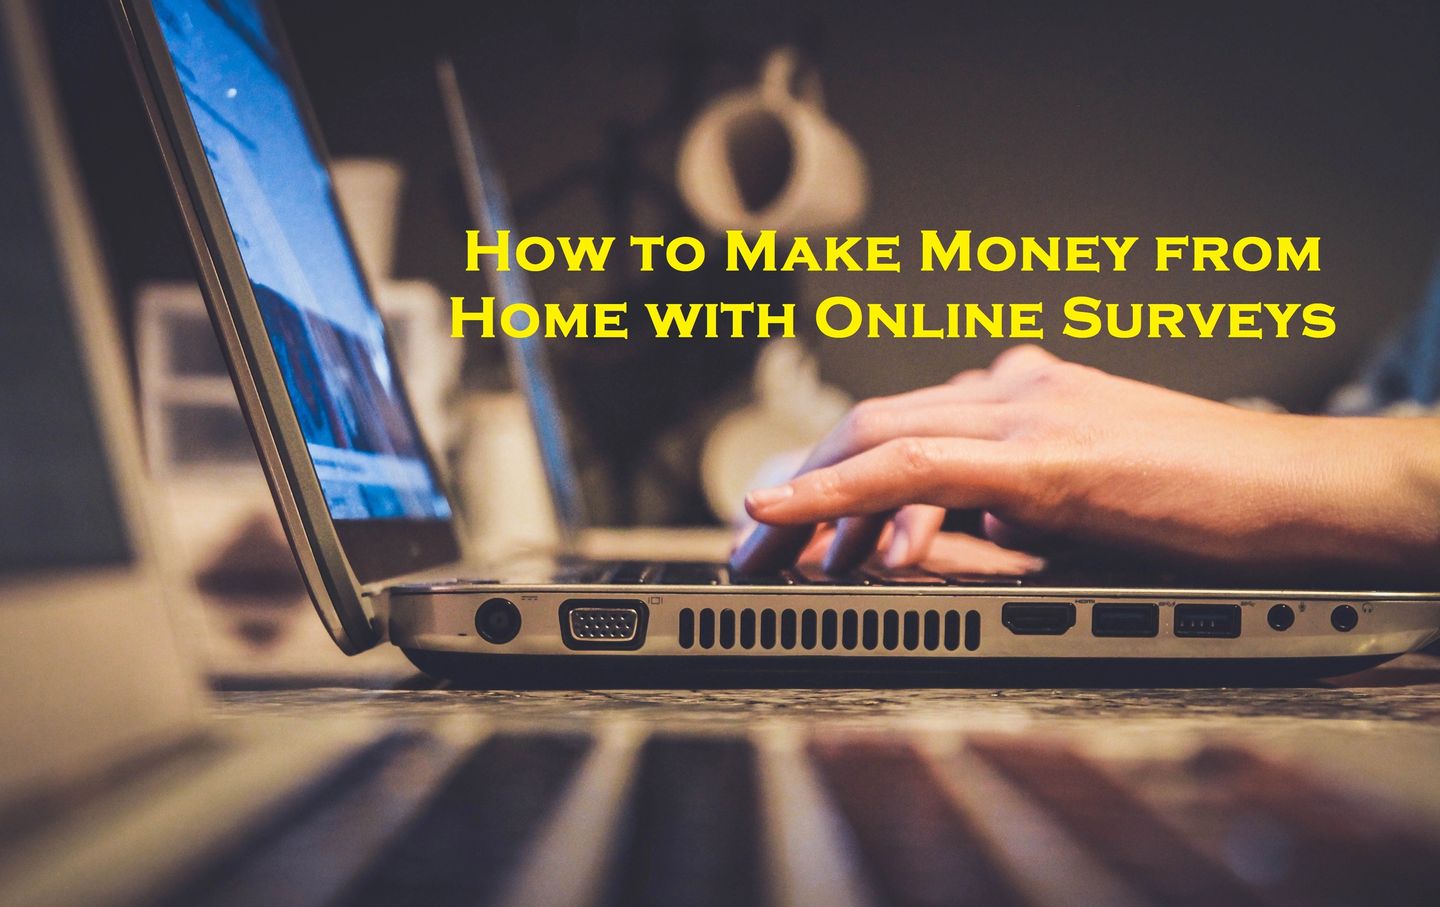 How to Make Money from Home with Online Surveys: Tips and Tricks